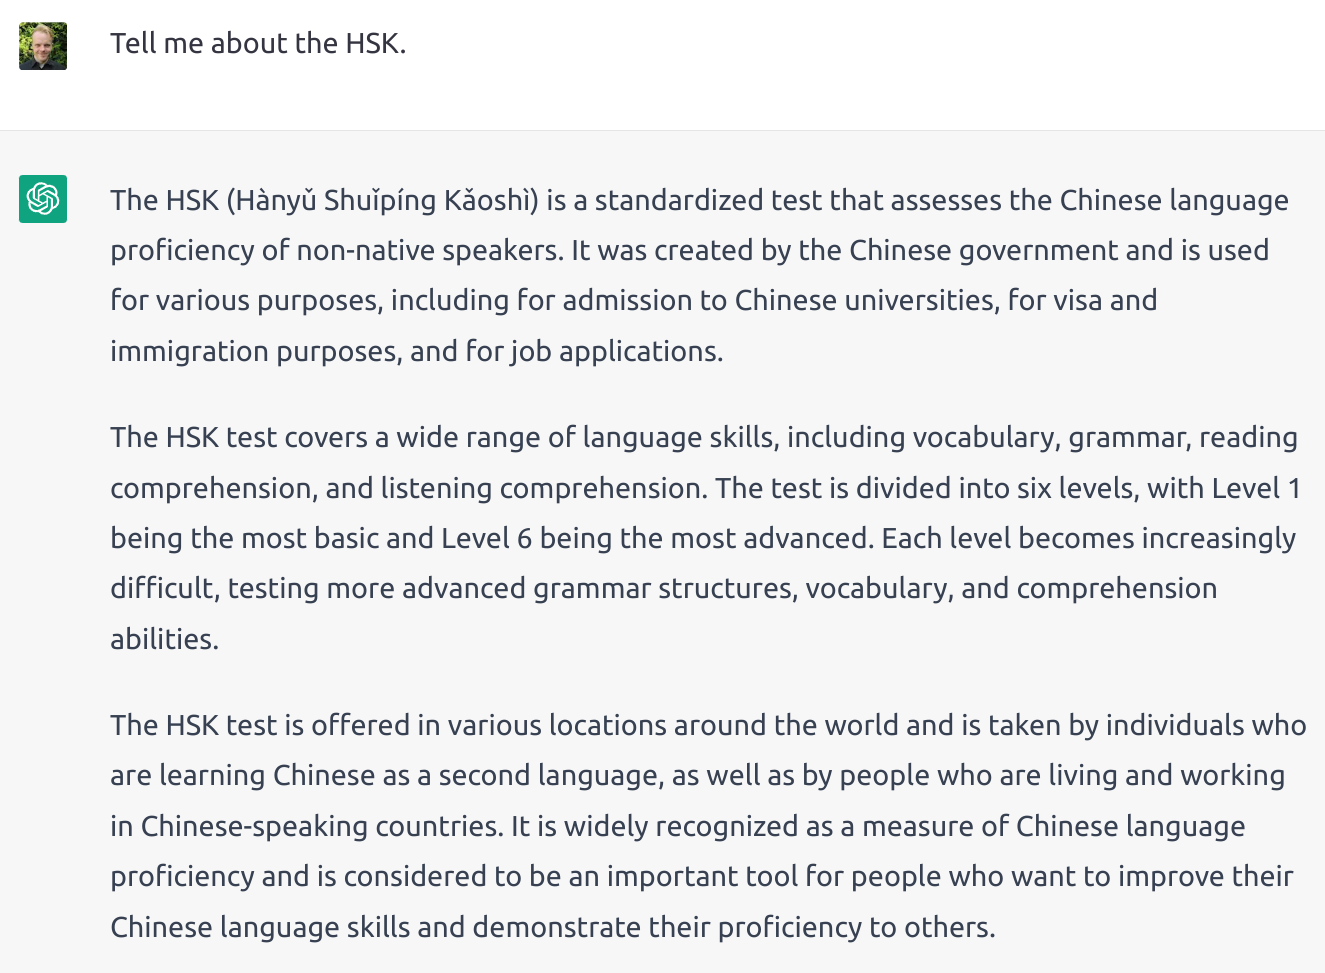 Screenshot of ChatGPT describing the HSK: Olle: Tell me about the HSK. ChatGPT: The HSK (Hànyǔ Shuǐpíng Kǎoshì) is a standardized test that assesses the Chinese language proficiency of non-native speakers. It was created by the Chinese government and is used for various purposes, including for admission to Chinese universities, for visa and immigration purposes, and for job applications. The HSK test covers a wide range of language skills, including vocabulary, grammar, reading comprehension, and listening comprehension. The test is divided into six levels, with Level 1 being the most basic and Level 6 being the most advanced. Each level becomes increasingly difficult, testing more advanced grammar structures, vocabulary, and comprehension abilities. The HSK test is offered in various locations around the world and is taken by individuals who are learning Chinese as a second language, as well as by people who are living and working in Chinese-speaking countries. It is widely recognized as a measure of Chinese language proficiency and is considered to be an important tool for people who want to improve their Chinese language skills and demonstrate their proficiency to others.